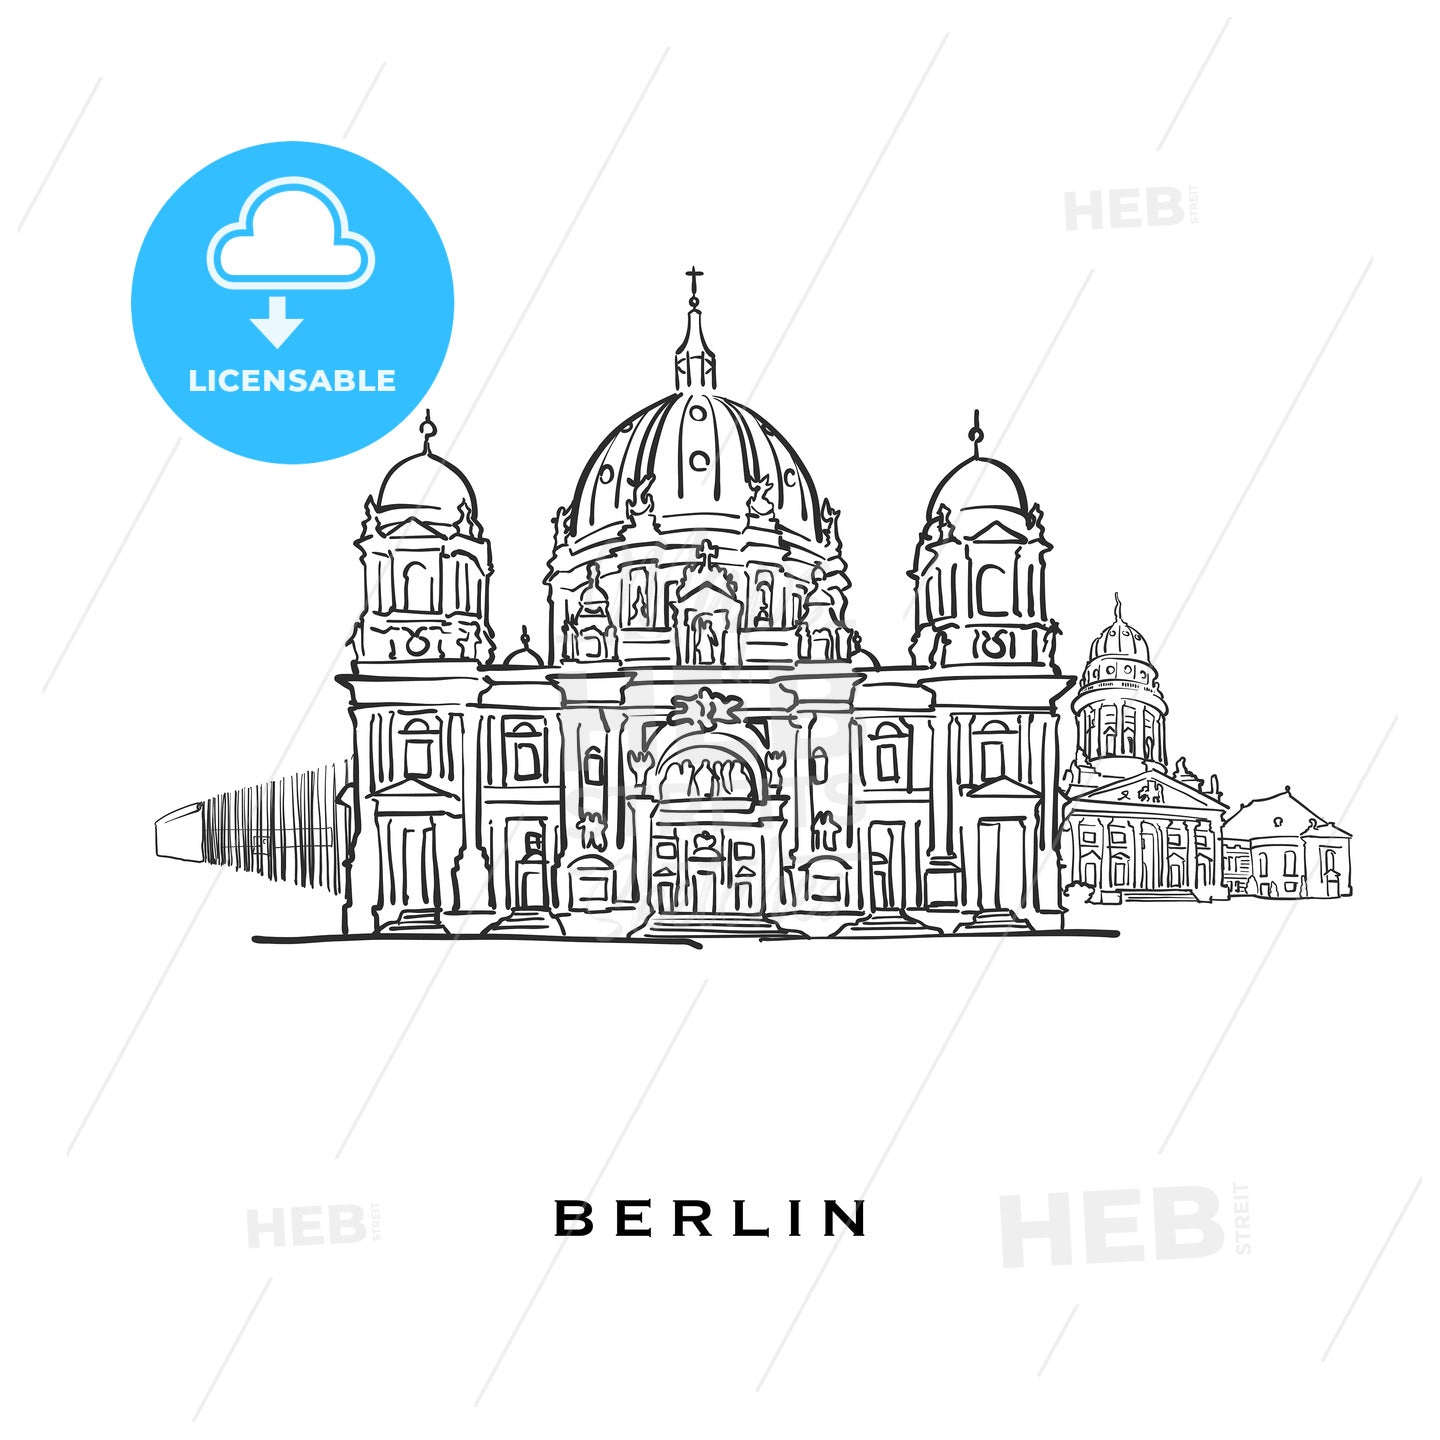 Berlin Germany famous architecture – instant download